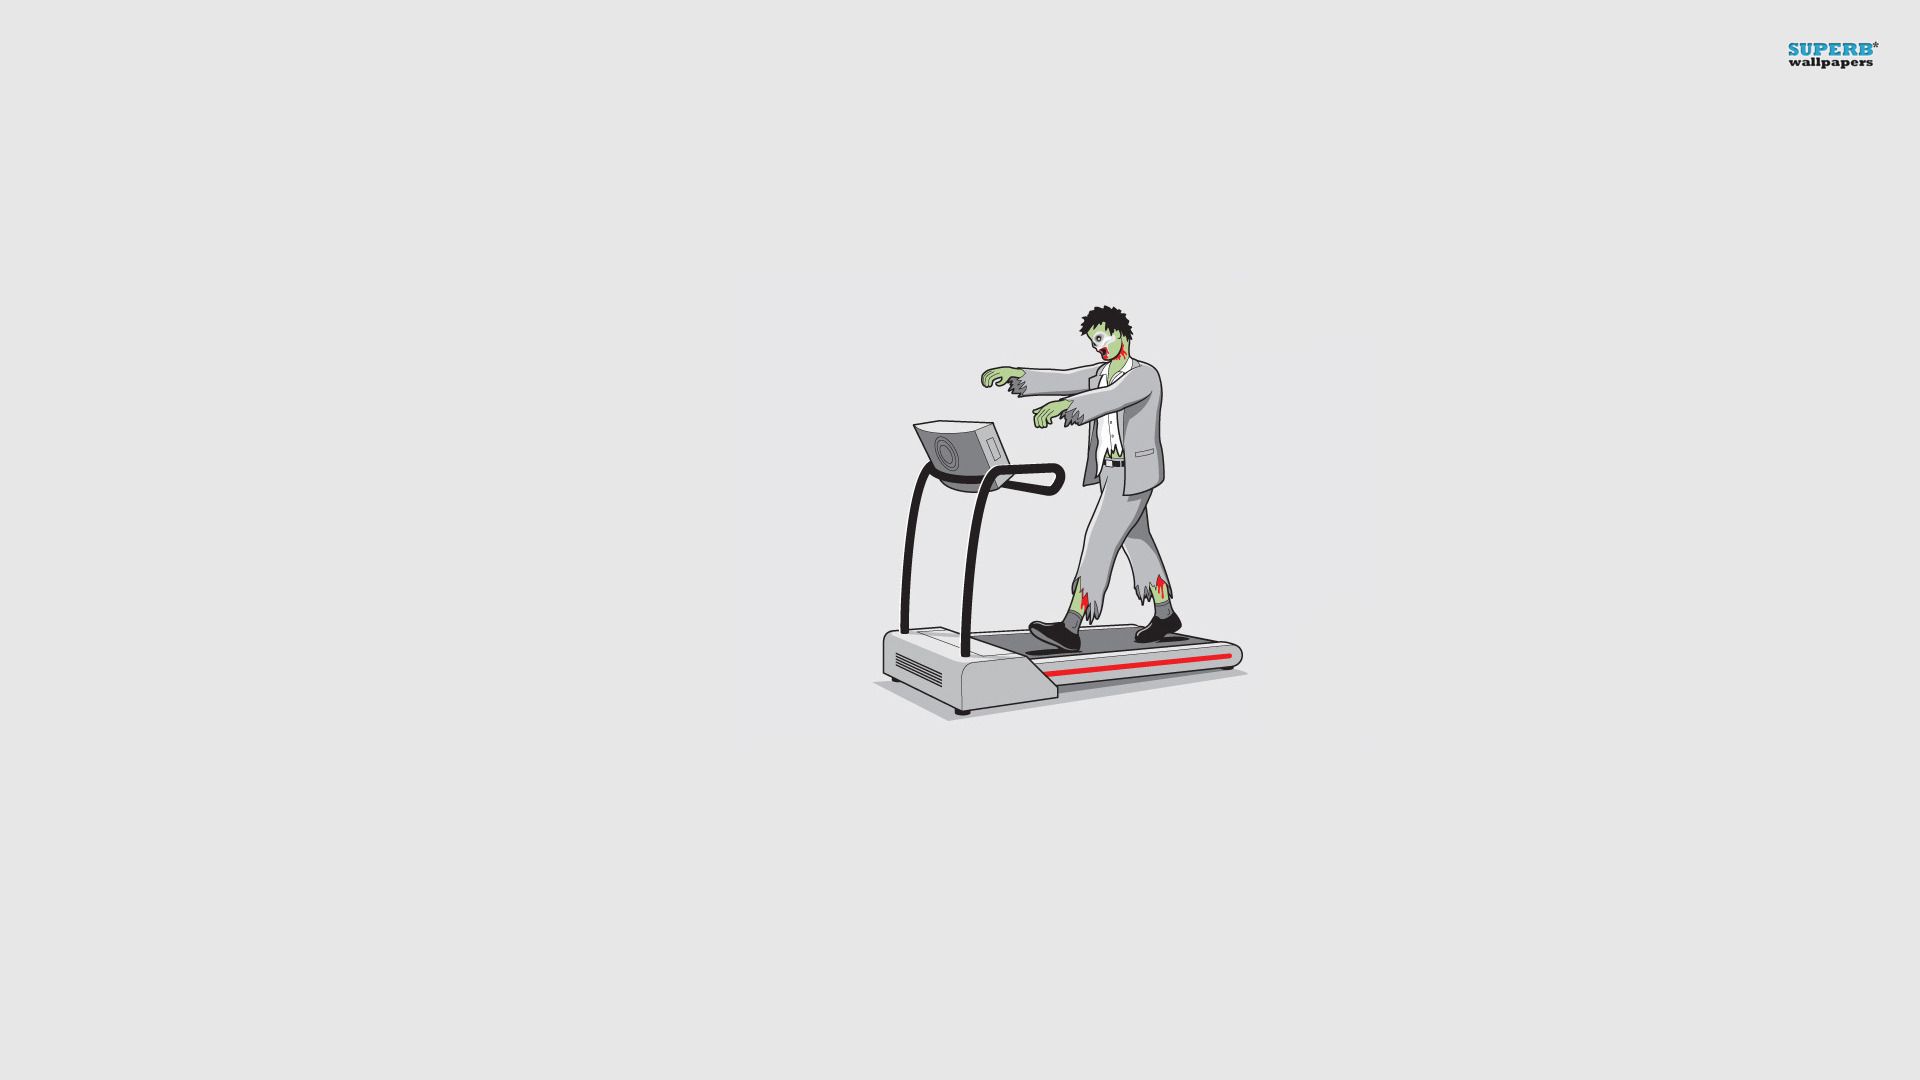 Zombie on a treadmill wallpaper - Funny wallpapers - #15212